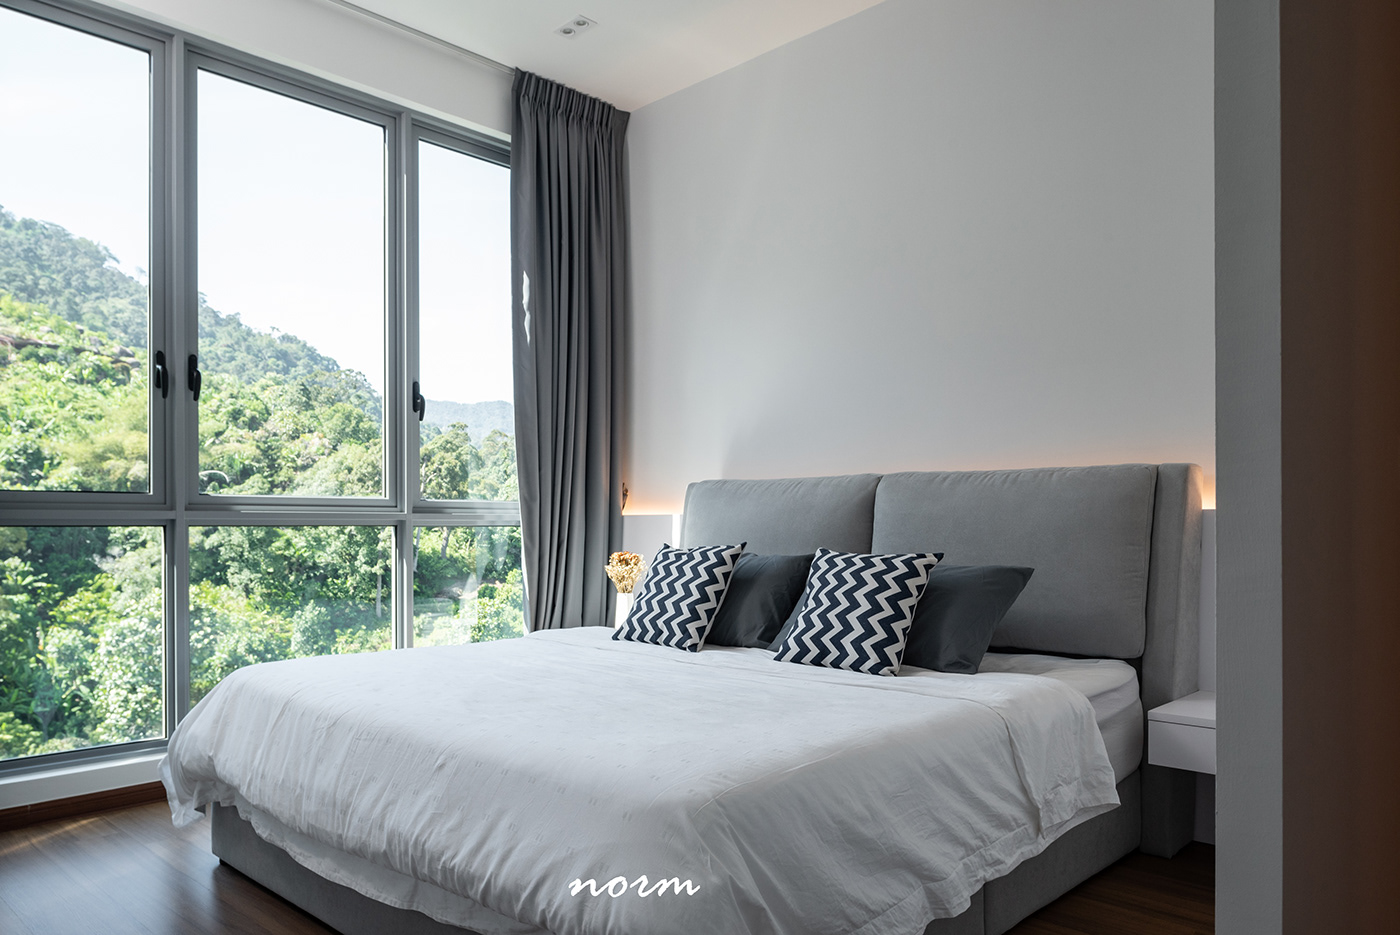 Master bedroom has a simple mattress bed and is filled with natural light from the floor-to-ceiling window. Main colors, such as gray and white combined with the scenery outside the window evoke feelings of closeness, comfort, as well as relaxation. 